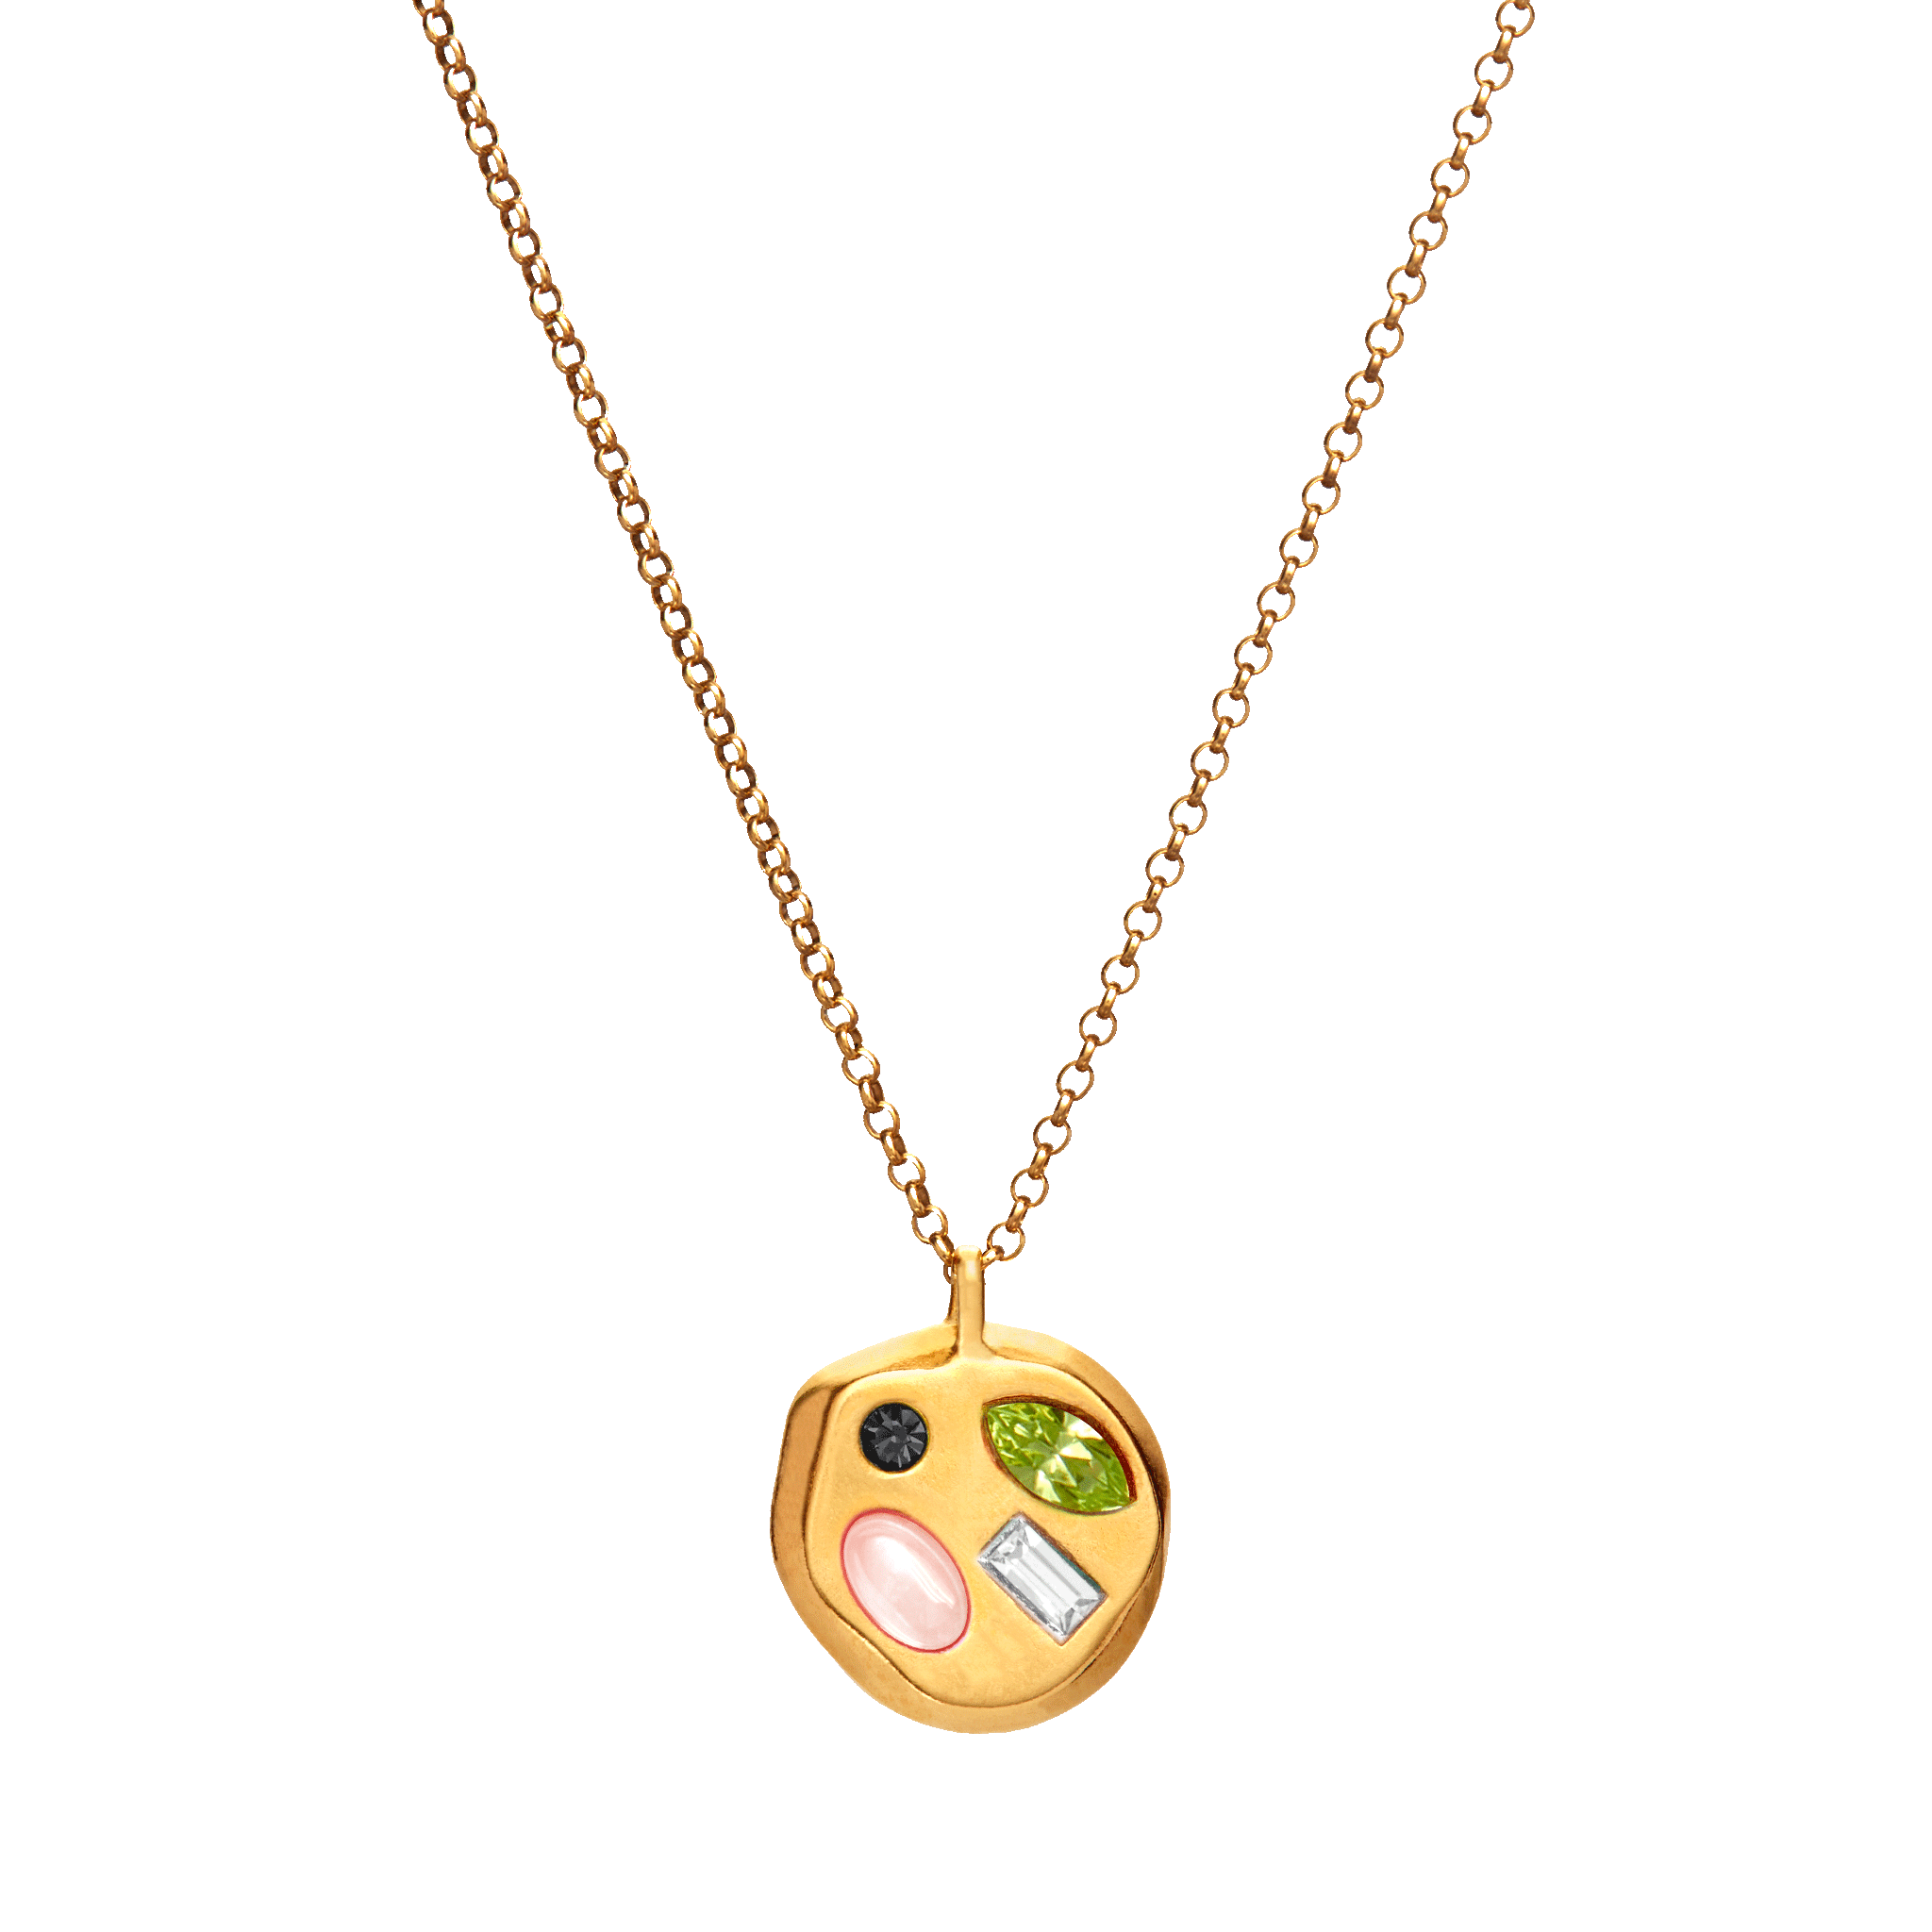 The August Third Pendant